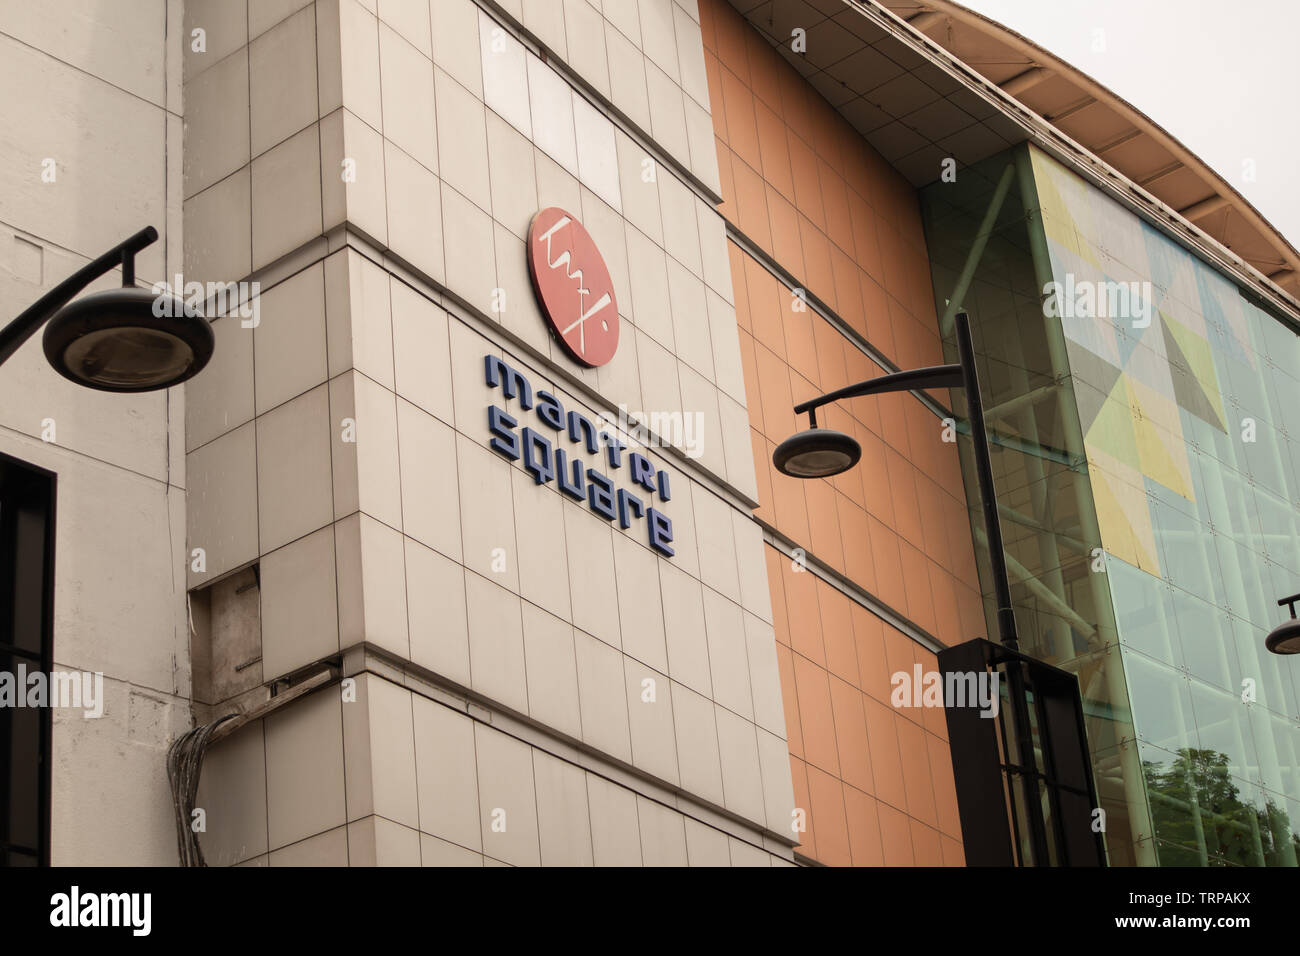 Bengaluru, INDIA - June 03,2019 : Front view of Mantri square shopping Mall building at Bangalore Stock Photo